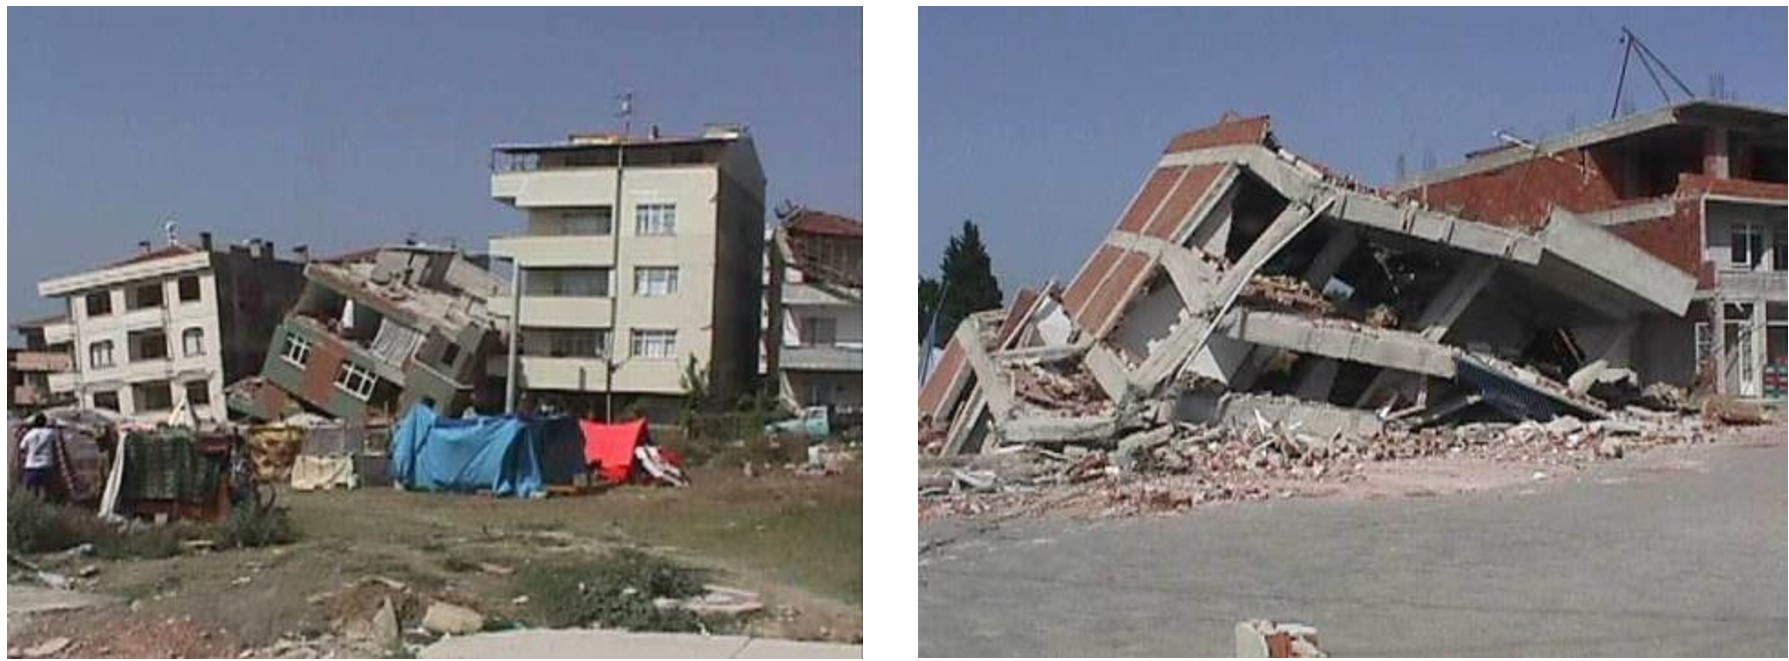 effects of earthquakes on people